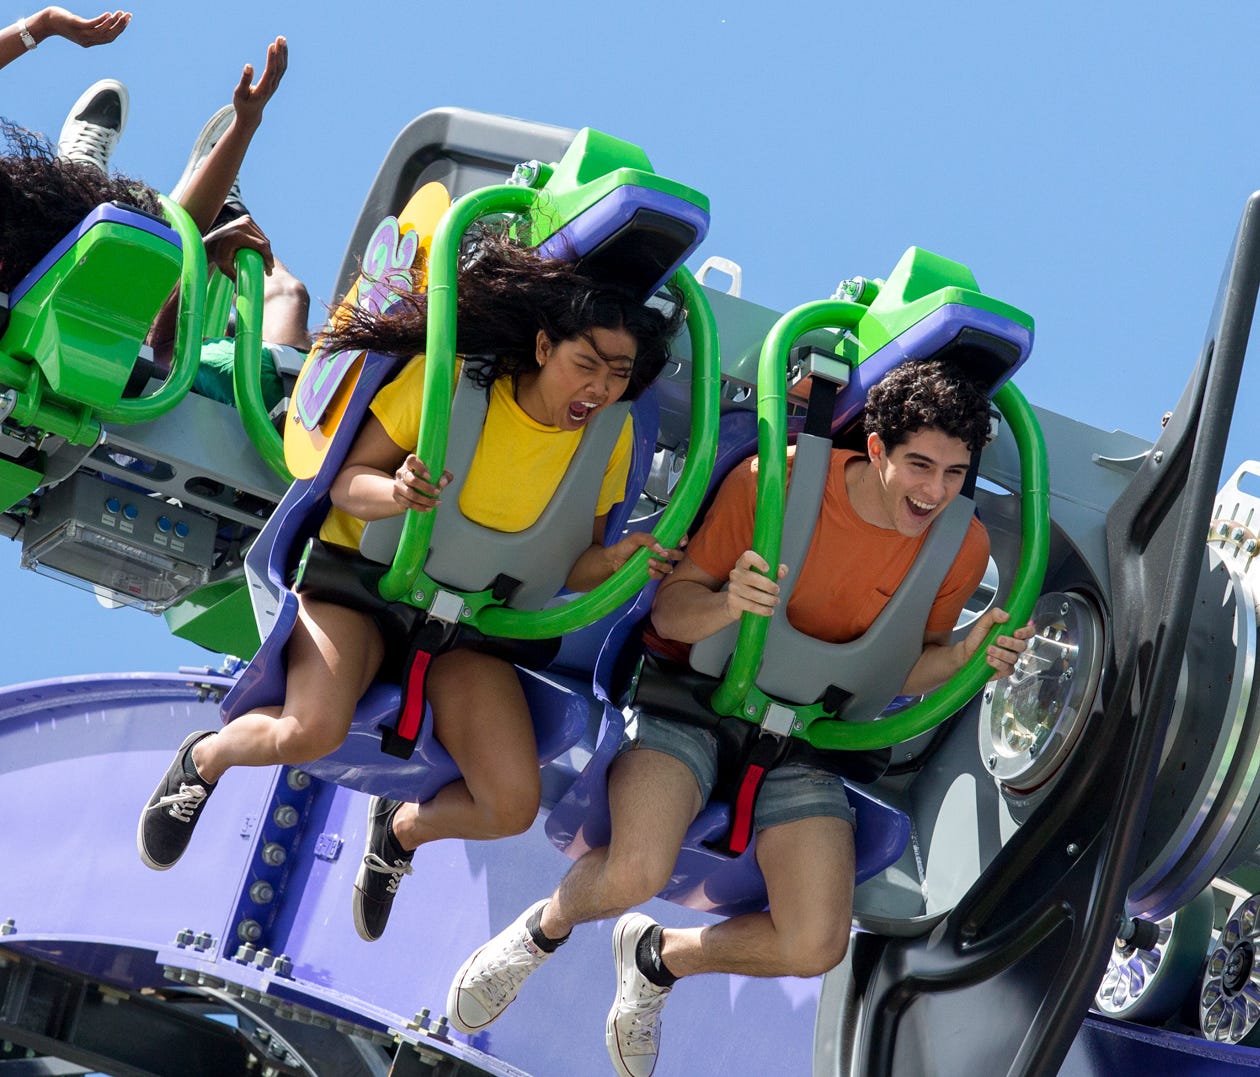 Illinois — Six Flags Great America: Limited-time offer of $81.99 for a season pass. Save 57 percent off the regular season pass price of $189.99. Experience Six Flags Great America and Hurricane Harbor for one price. Located between Chicago and Milwa